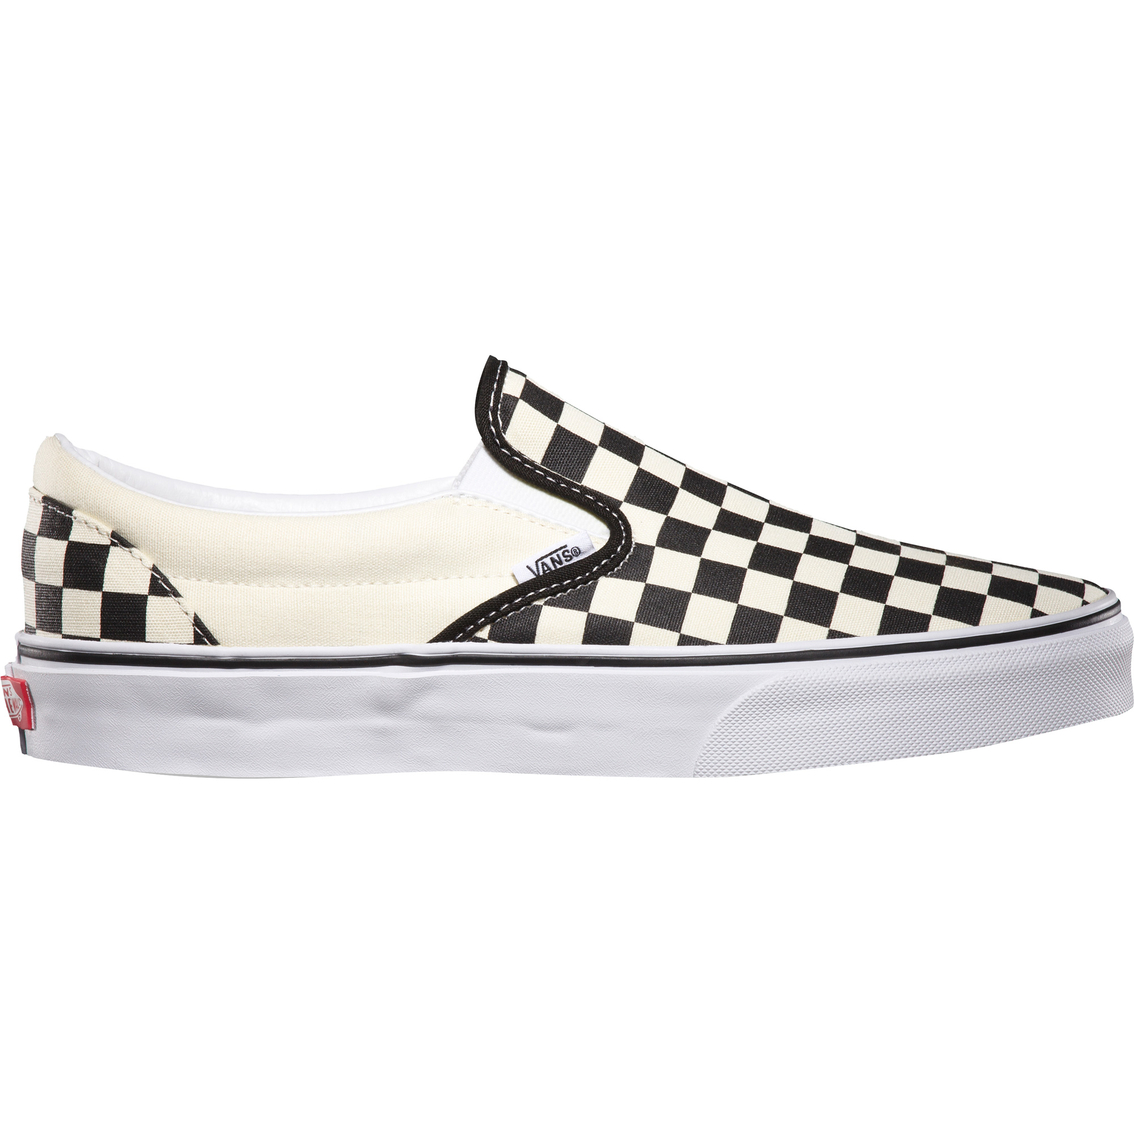 Vans Women's Classic Checkerboard Slip On Shoes - Image 2 of 5